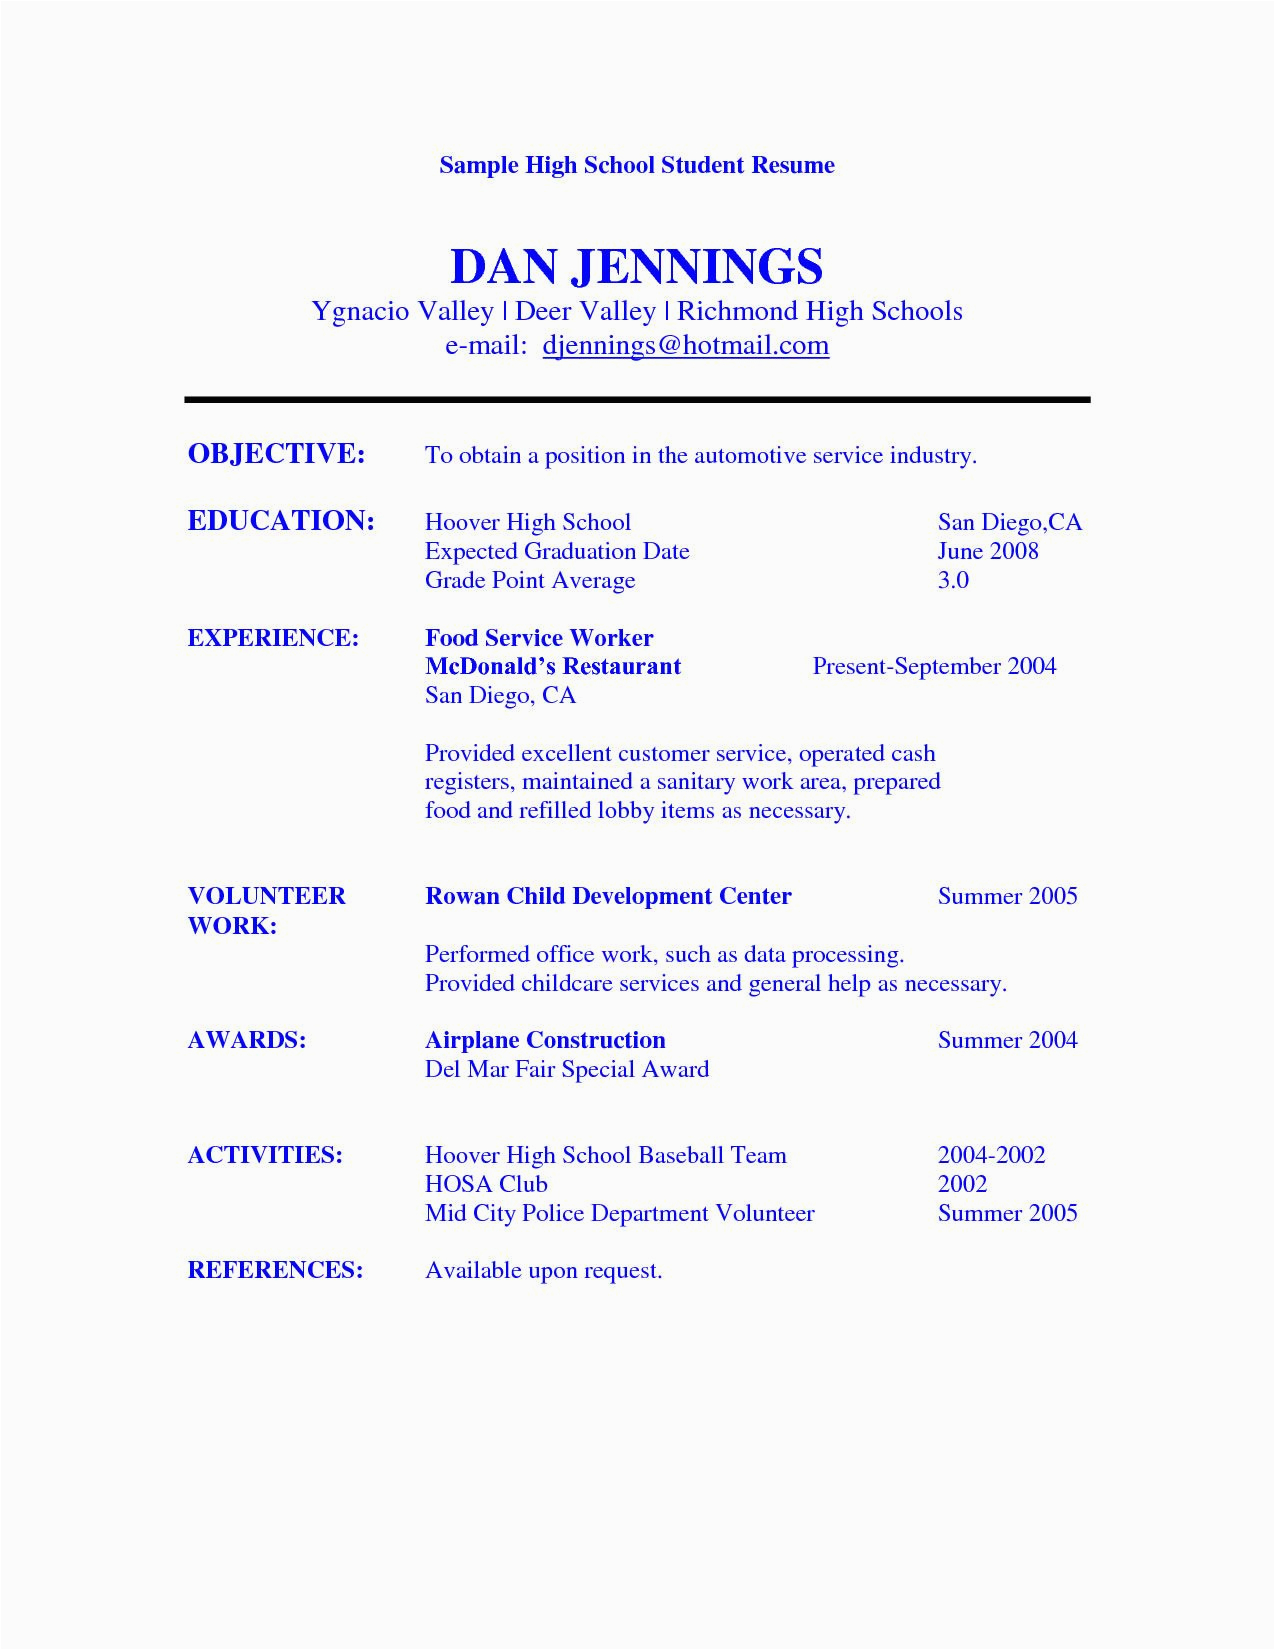 Sample Resume Objective Statements for High School Students Business Skills Resume